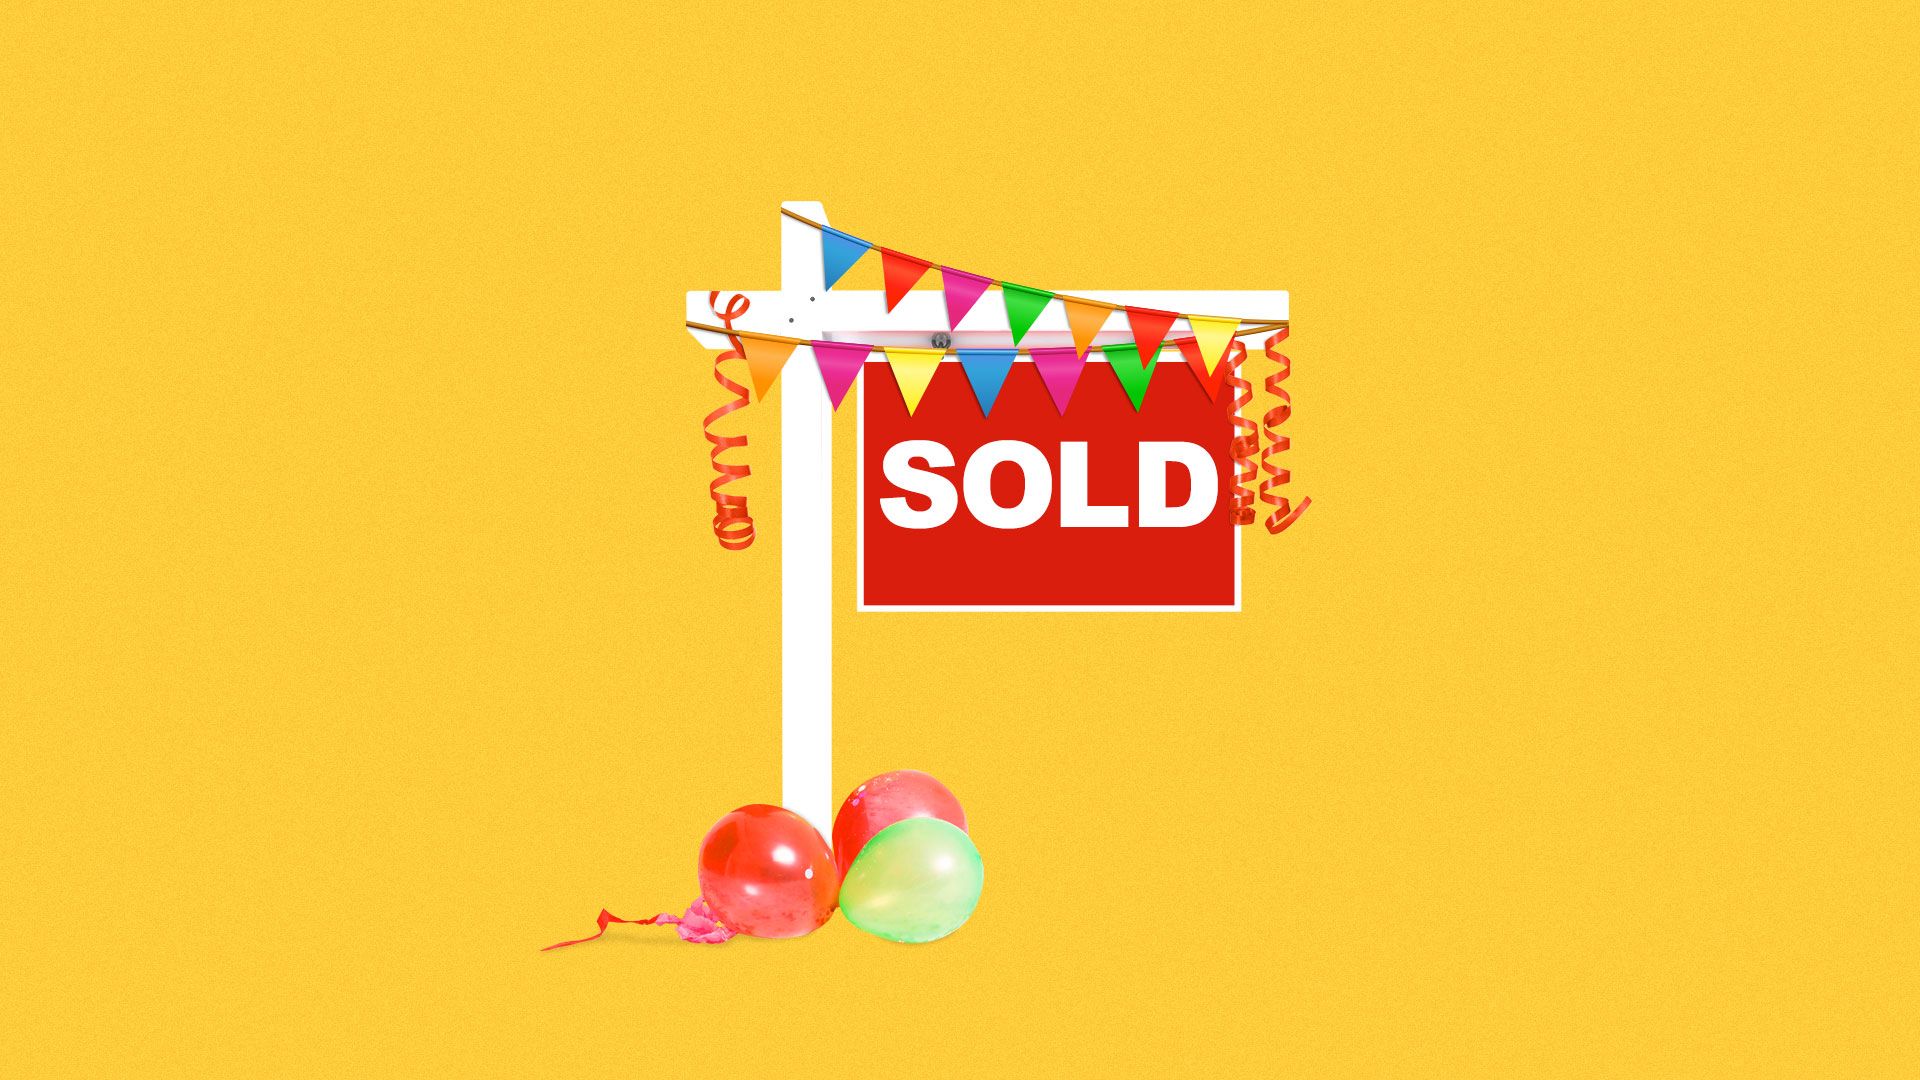 Illustration of a "sold" sign with ribbons, bunting, and balloons.